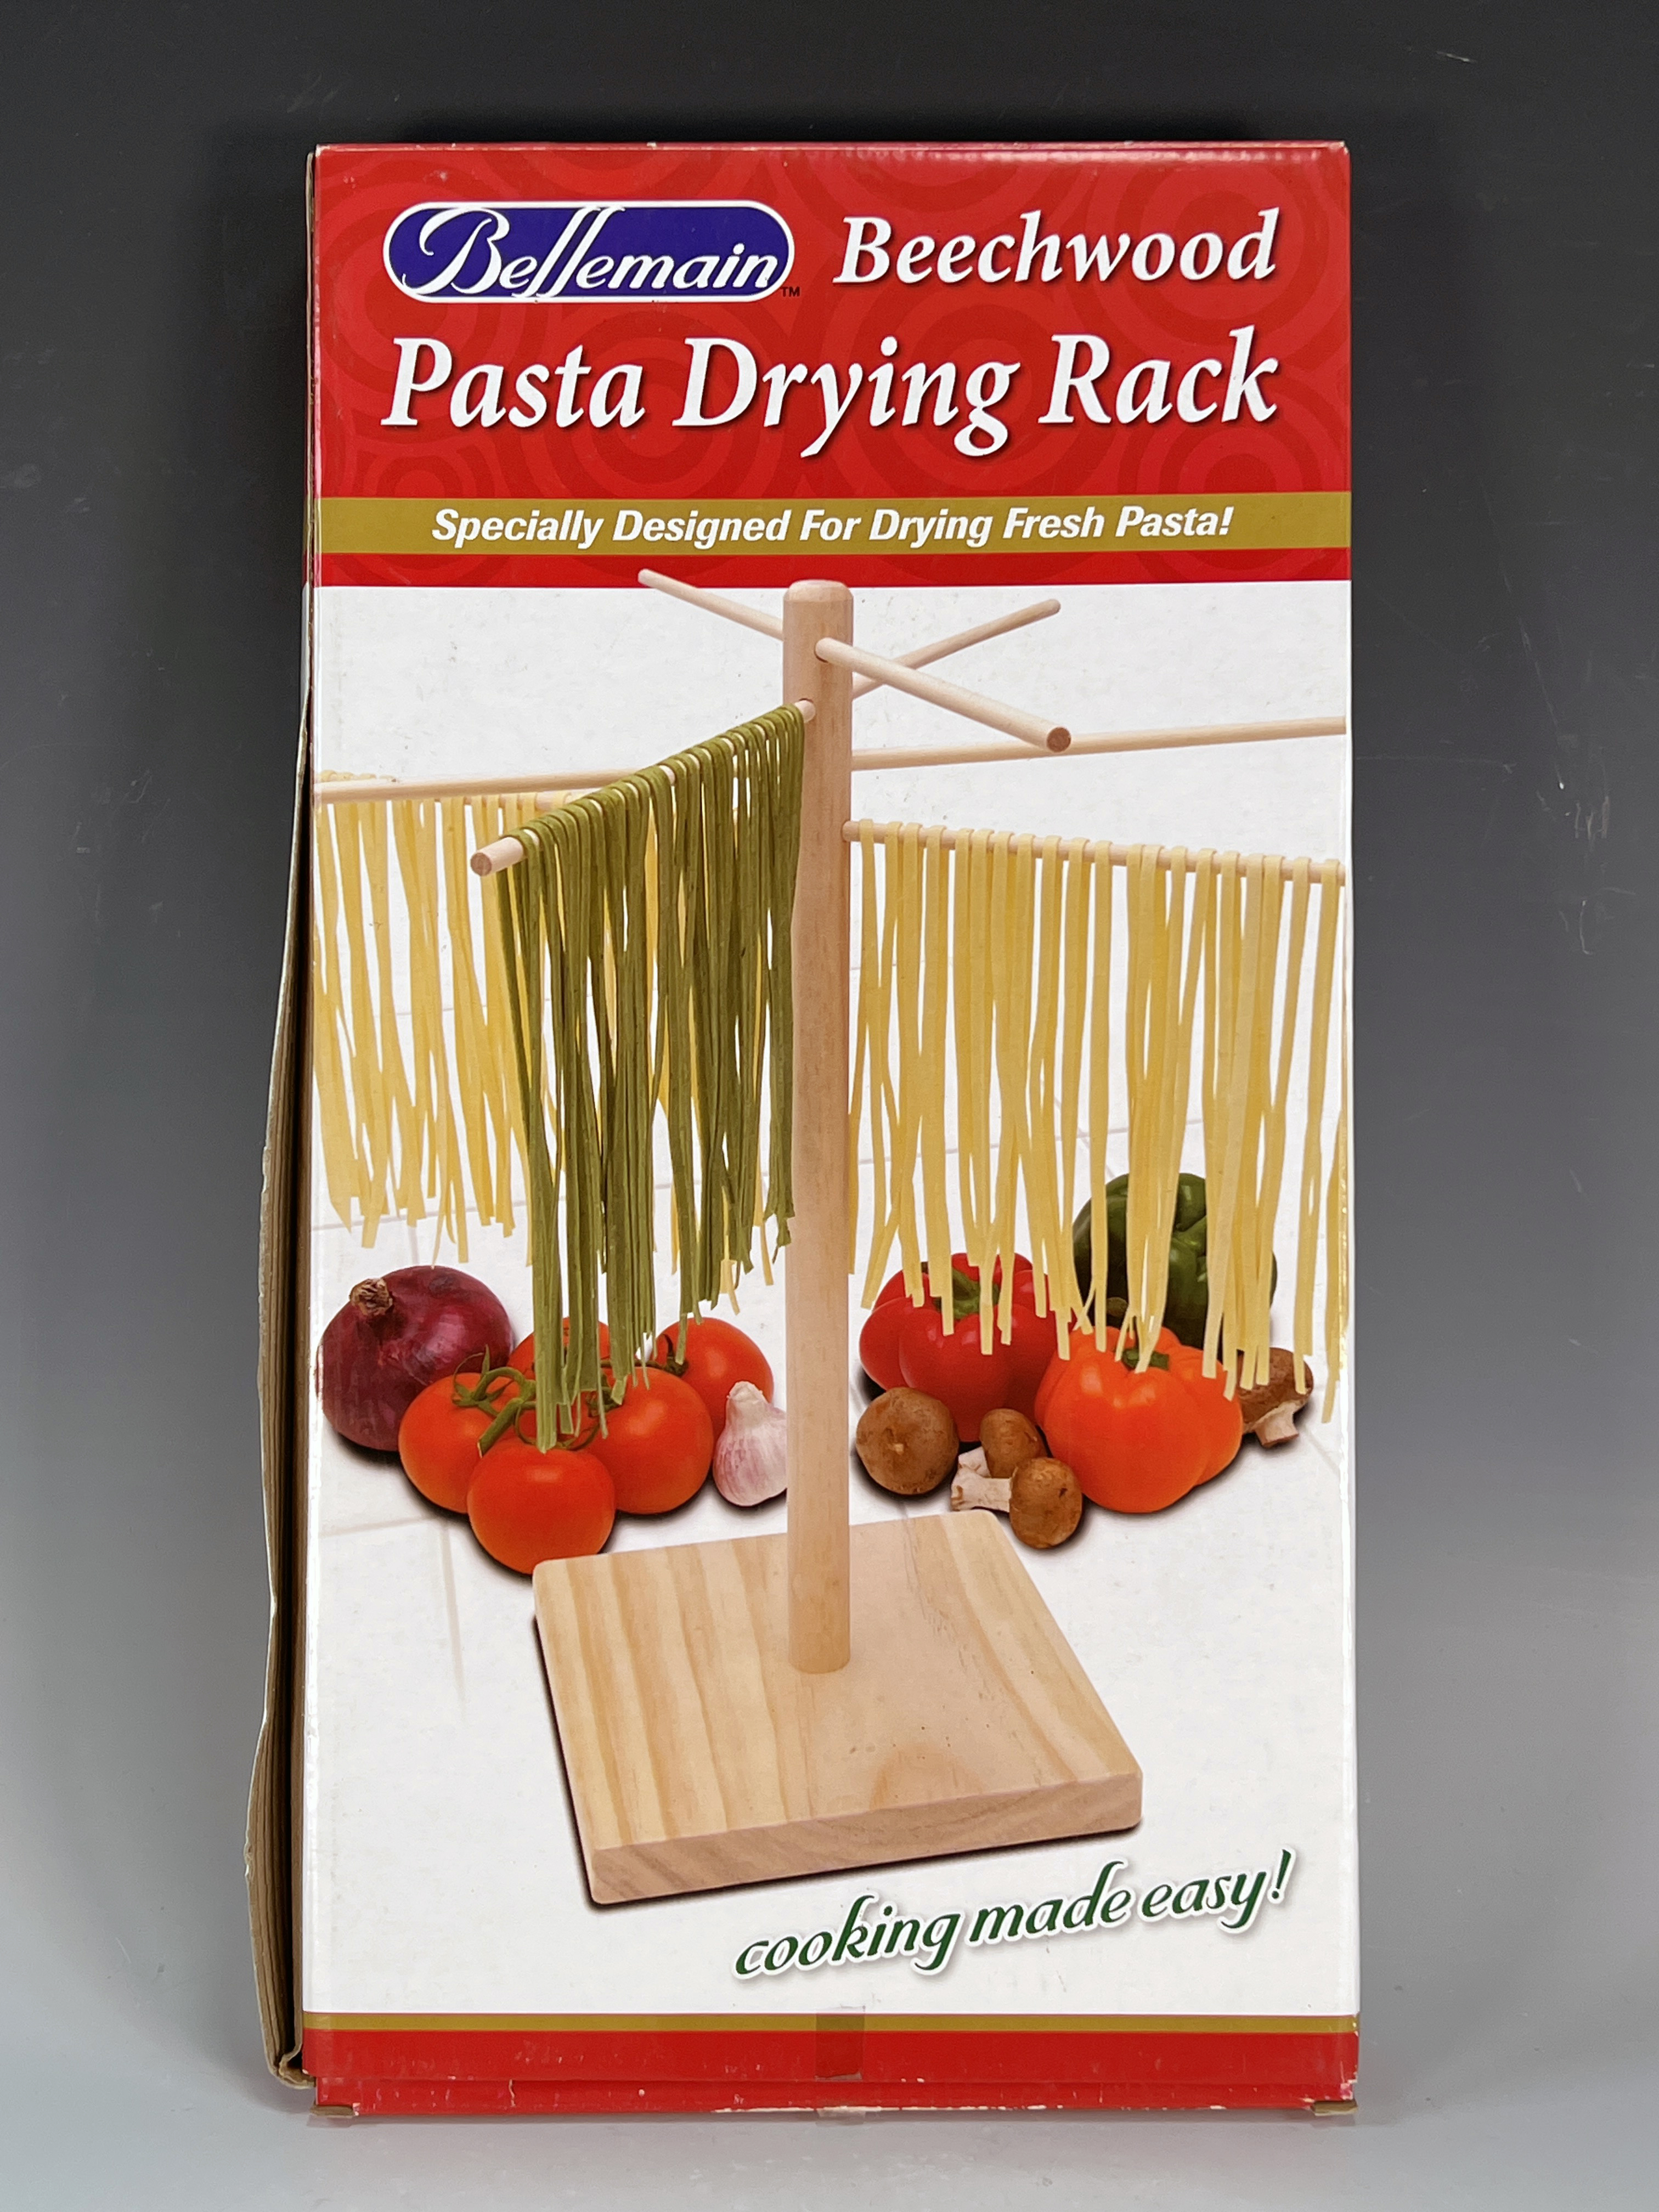 Pasta Drying Rack, Large Glass Serving Bowl, William Sonoma Dishes image 2